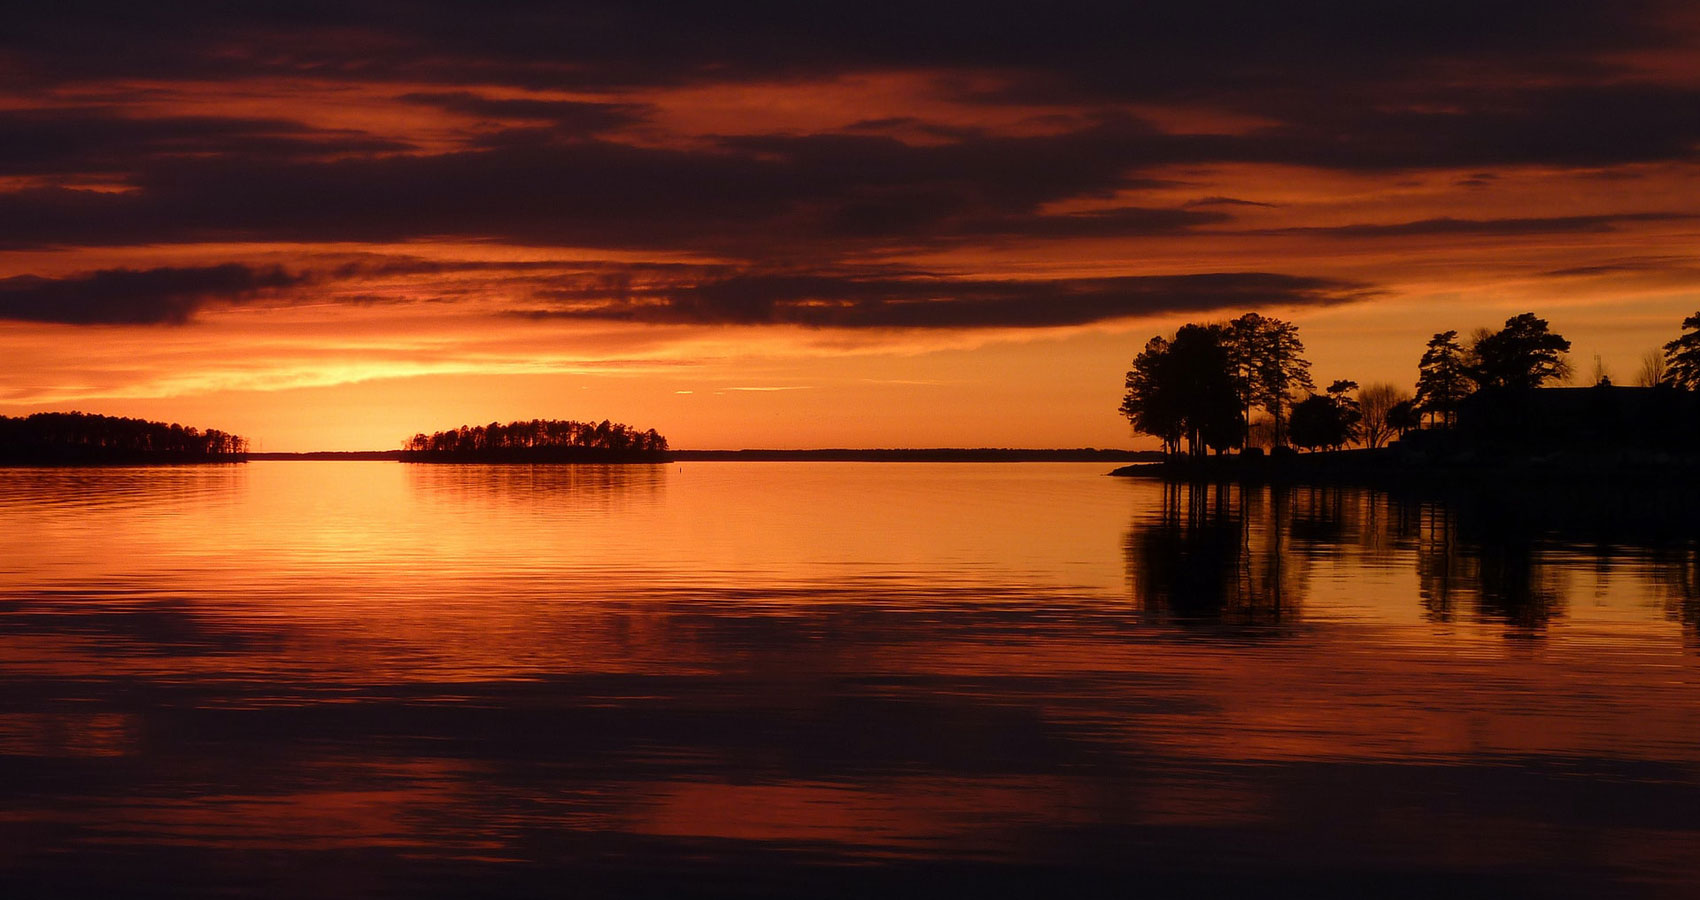 Calm Waters Of Time Below An Orangey Sky, poetry by Linda Imbler at Spillwords.com